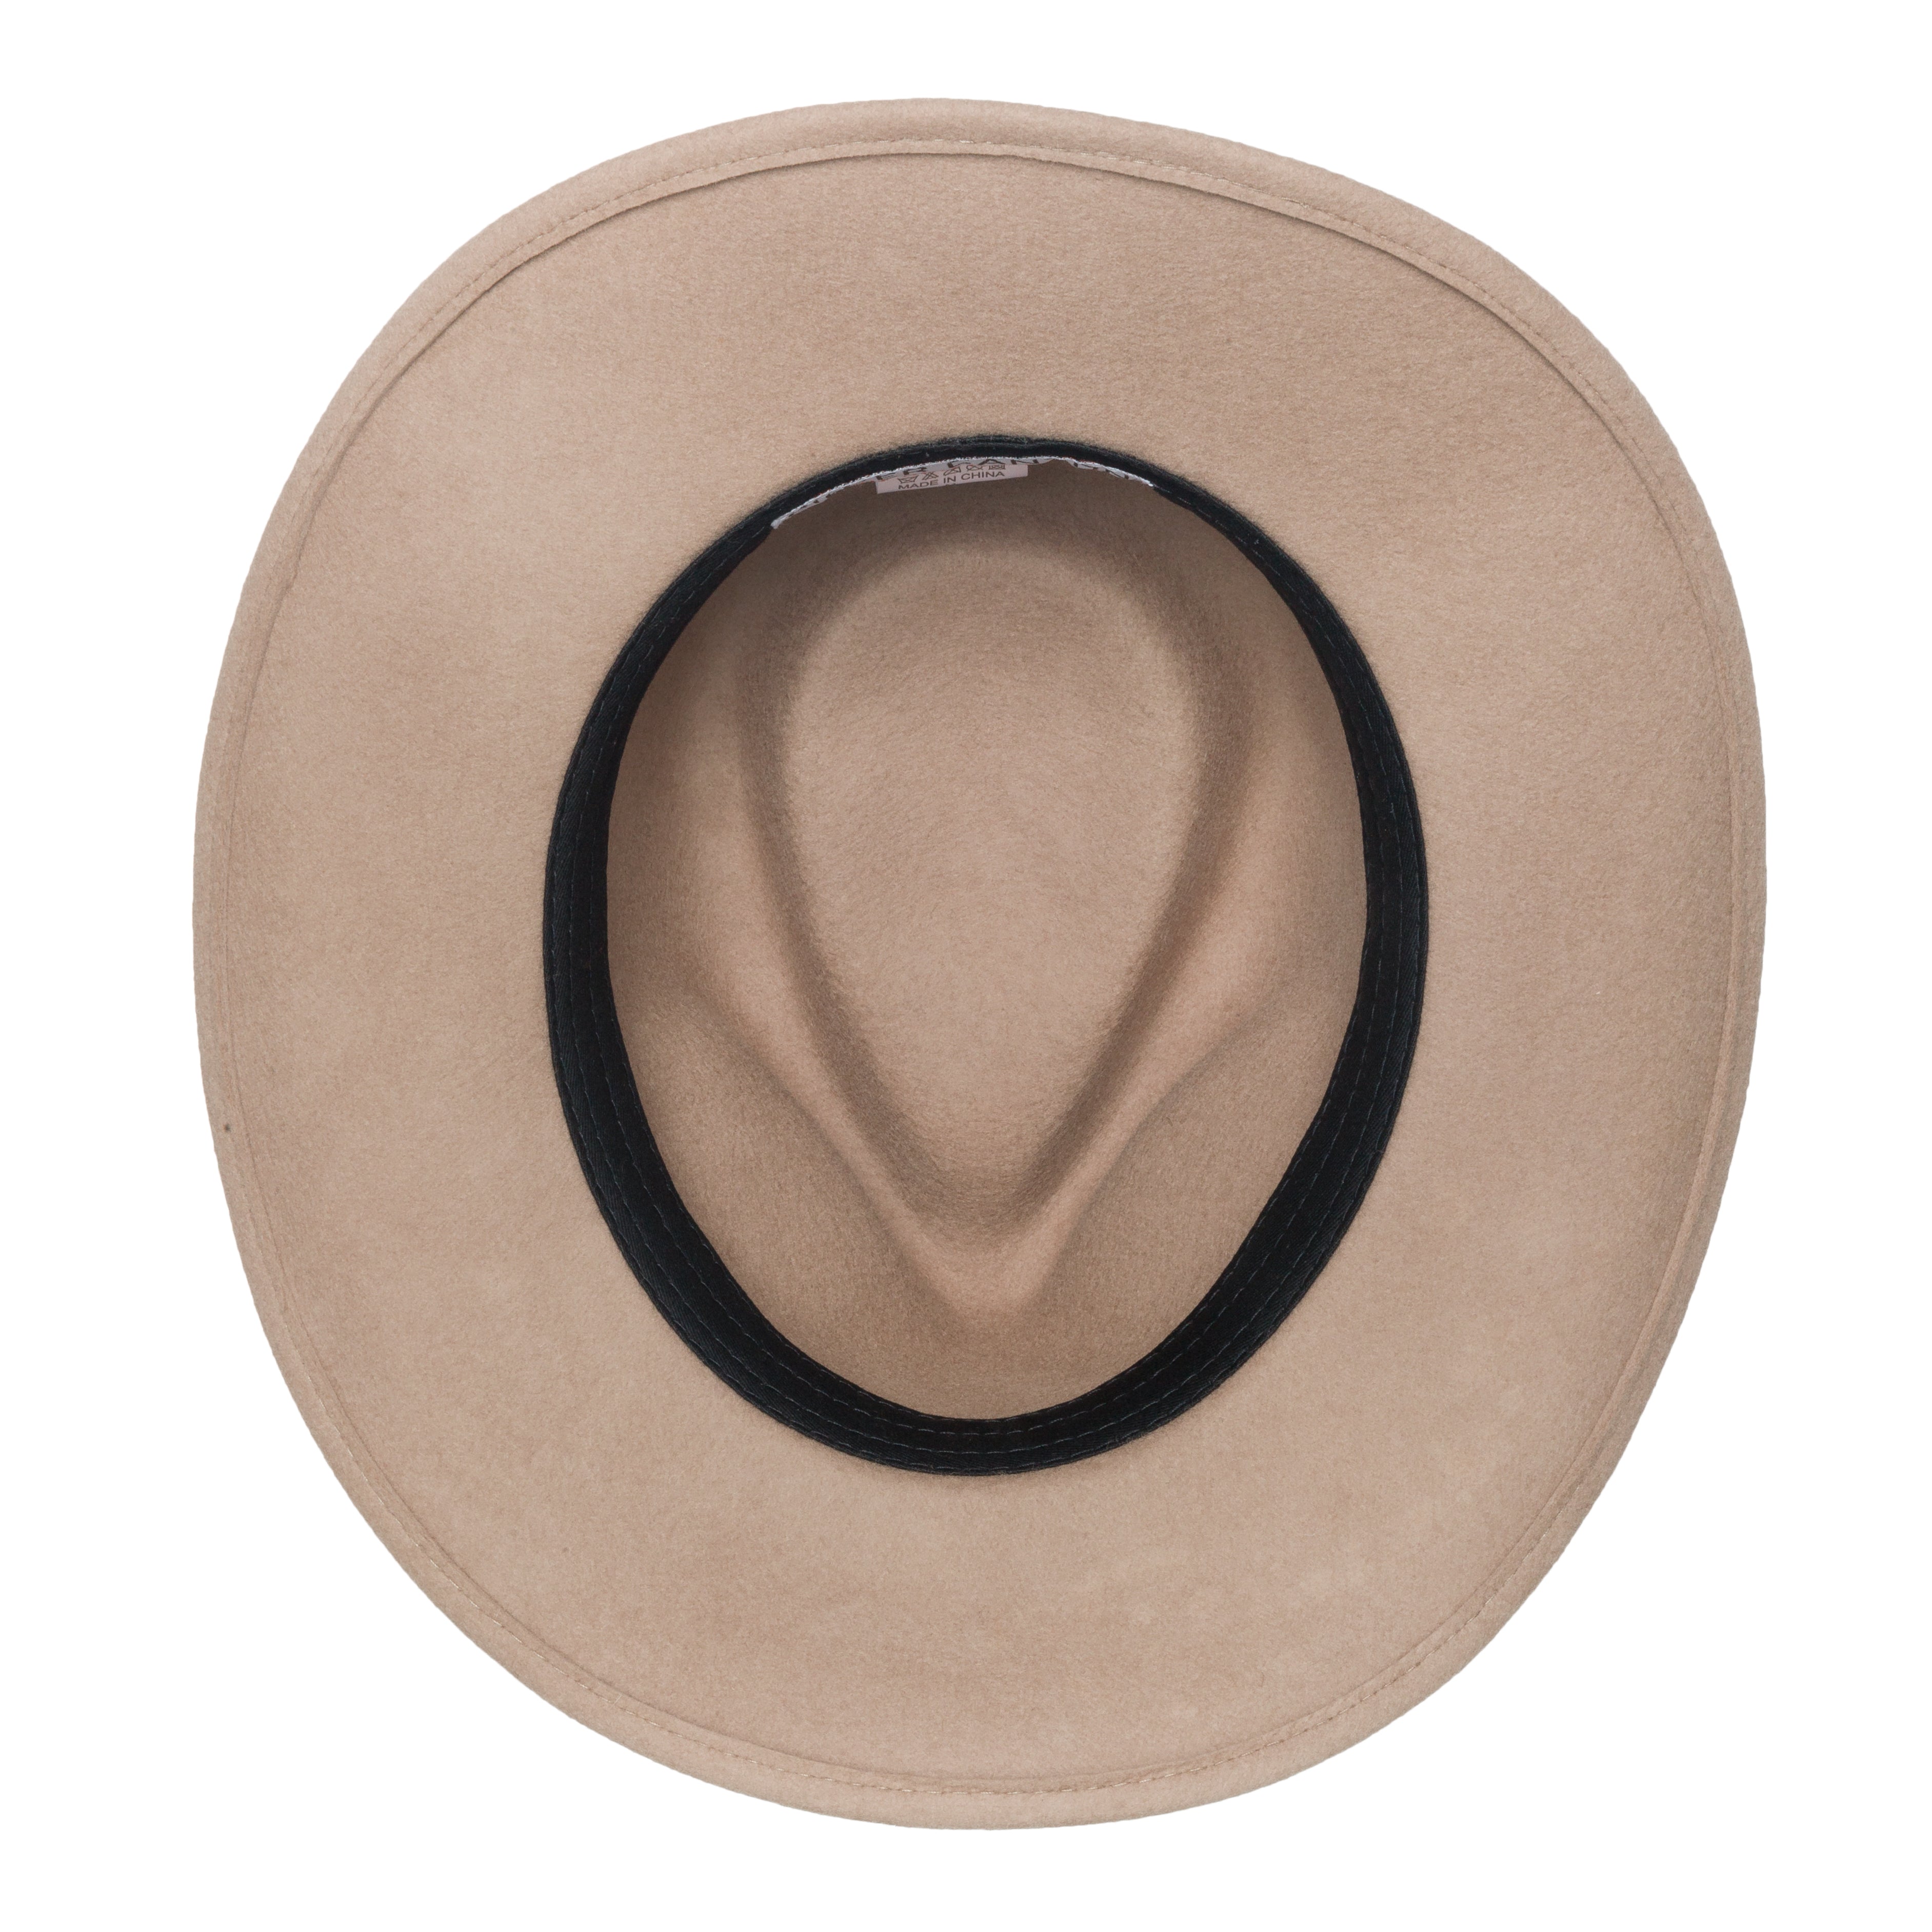 Men’s Outback Wool Cowboy Hat |Montana Putty Crushable Western Felt By Silver Canyon